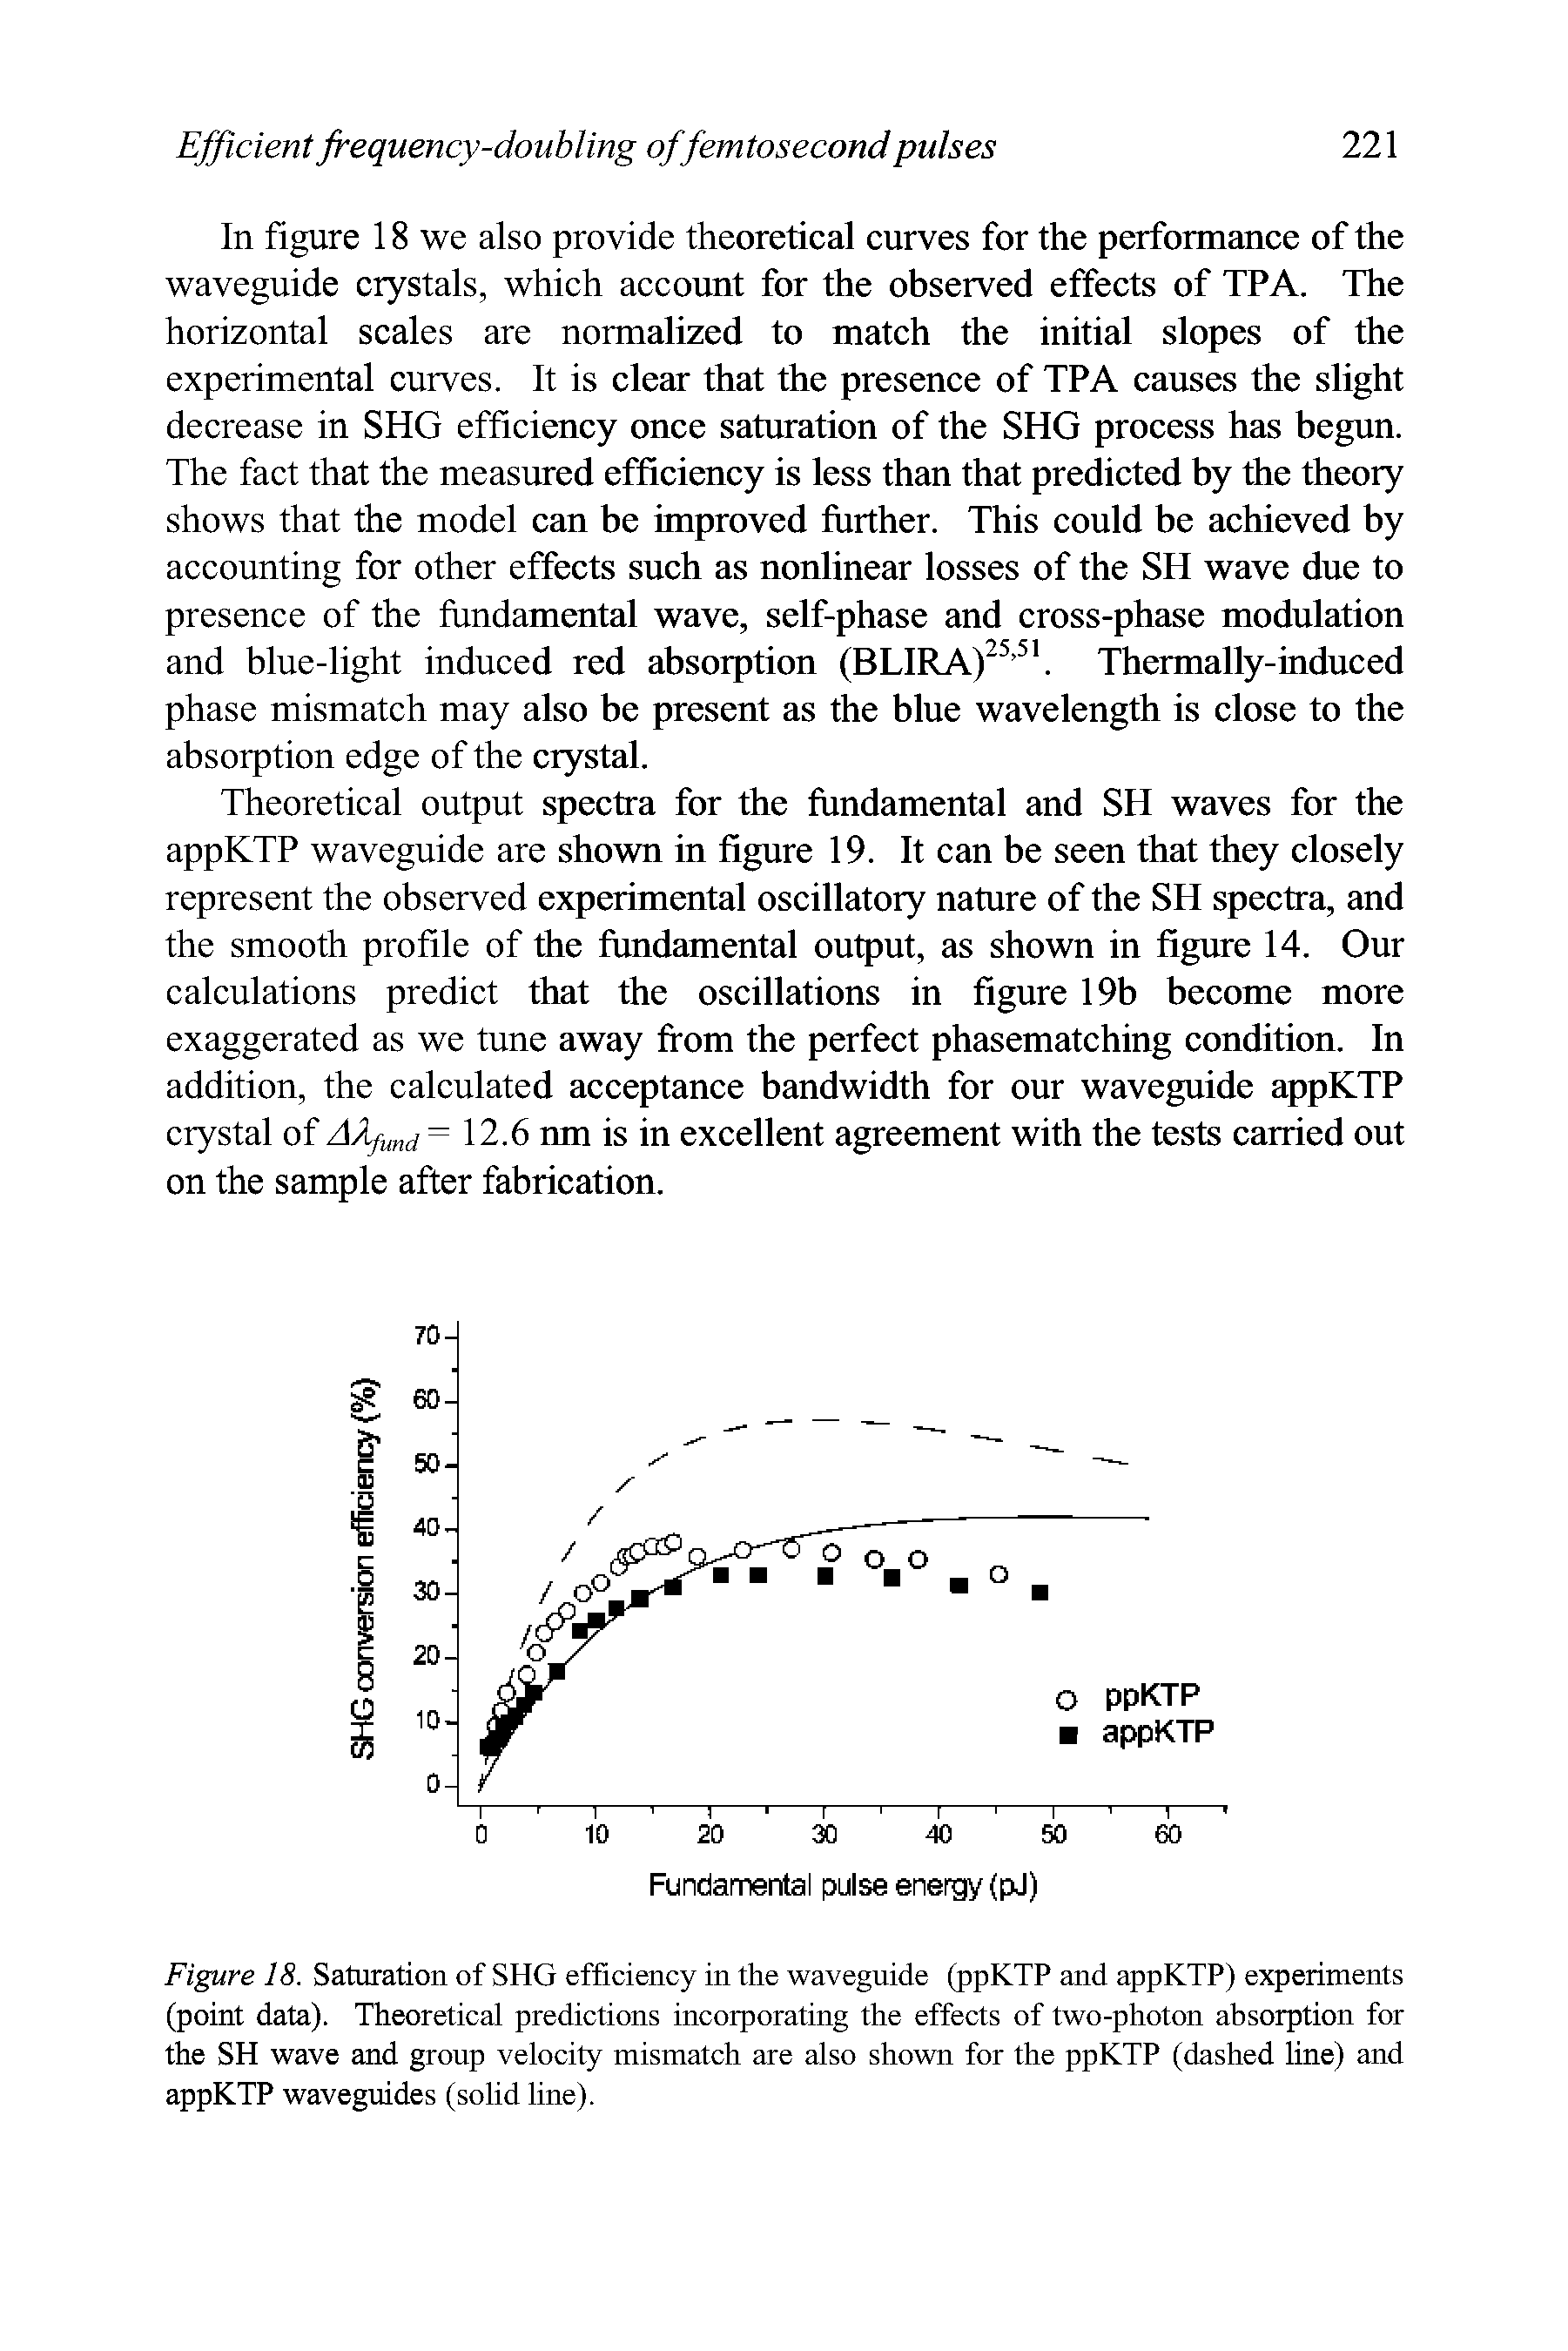 Figure 18. Saturation of SHG efficiency in the waveguide (ppKTP and appKTP) experiments (point data). Theoretical predictions incorporating the effects of two-photon absorption for the SH wave and group velocity mismatch are also shown for the ppKTP (dashed line) and appKTP waveguides (solid line).